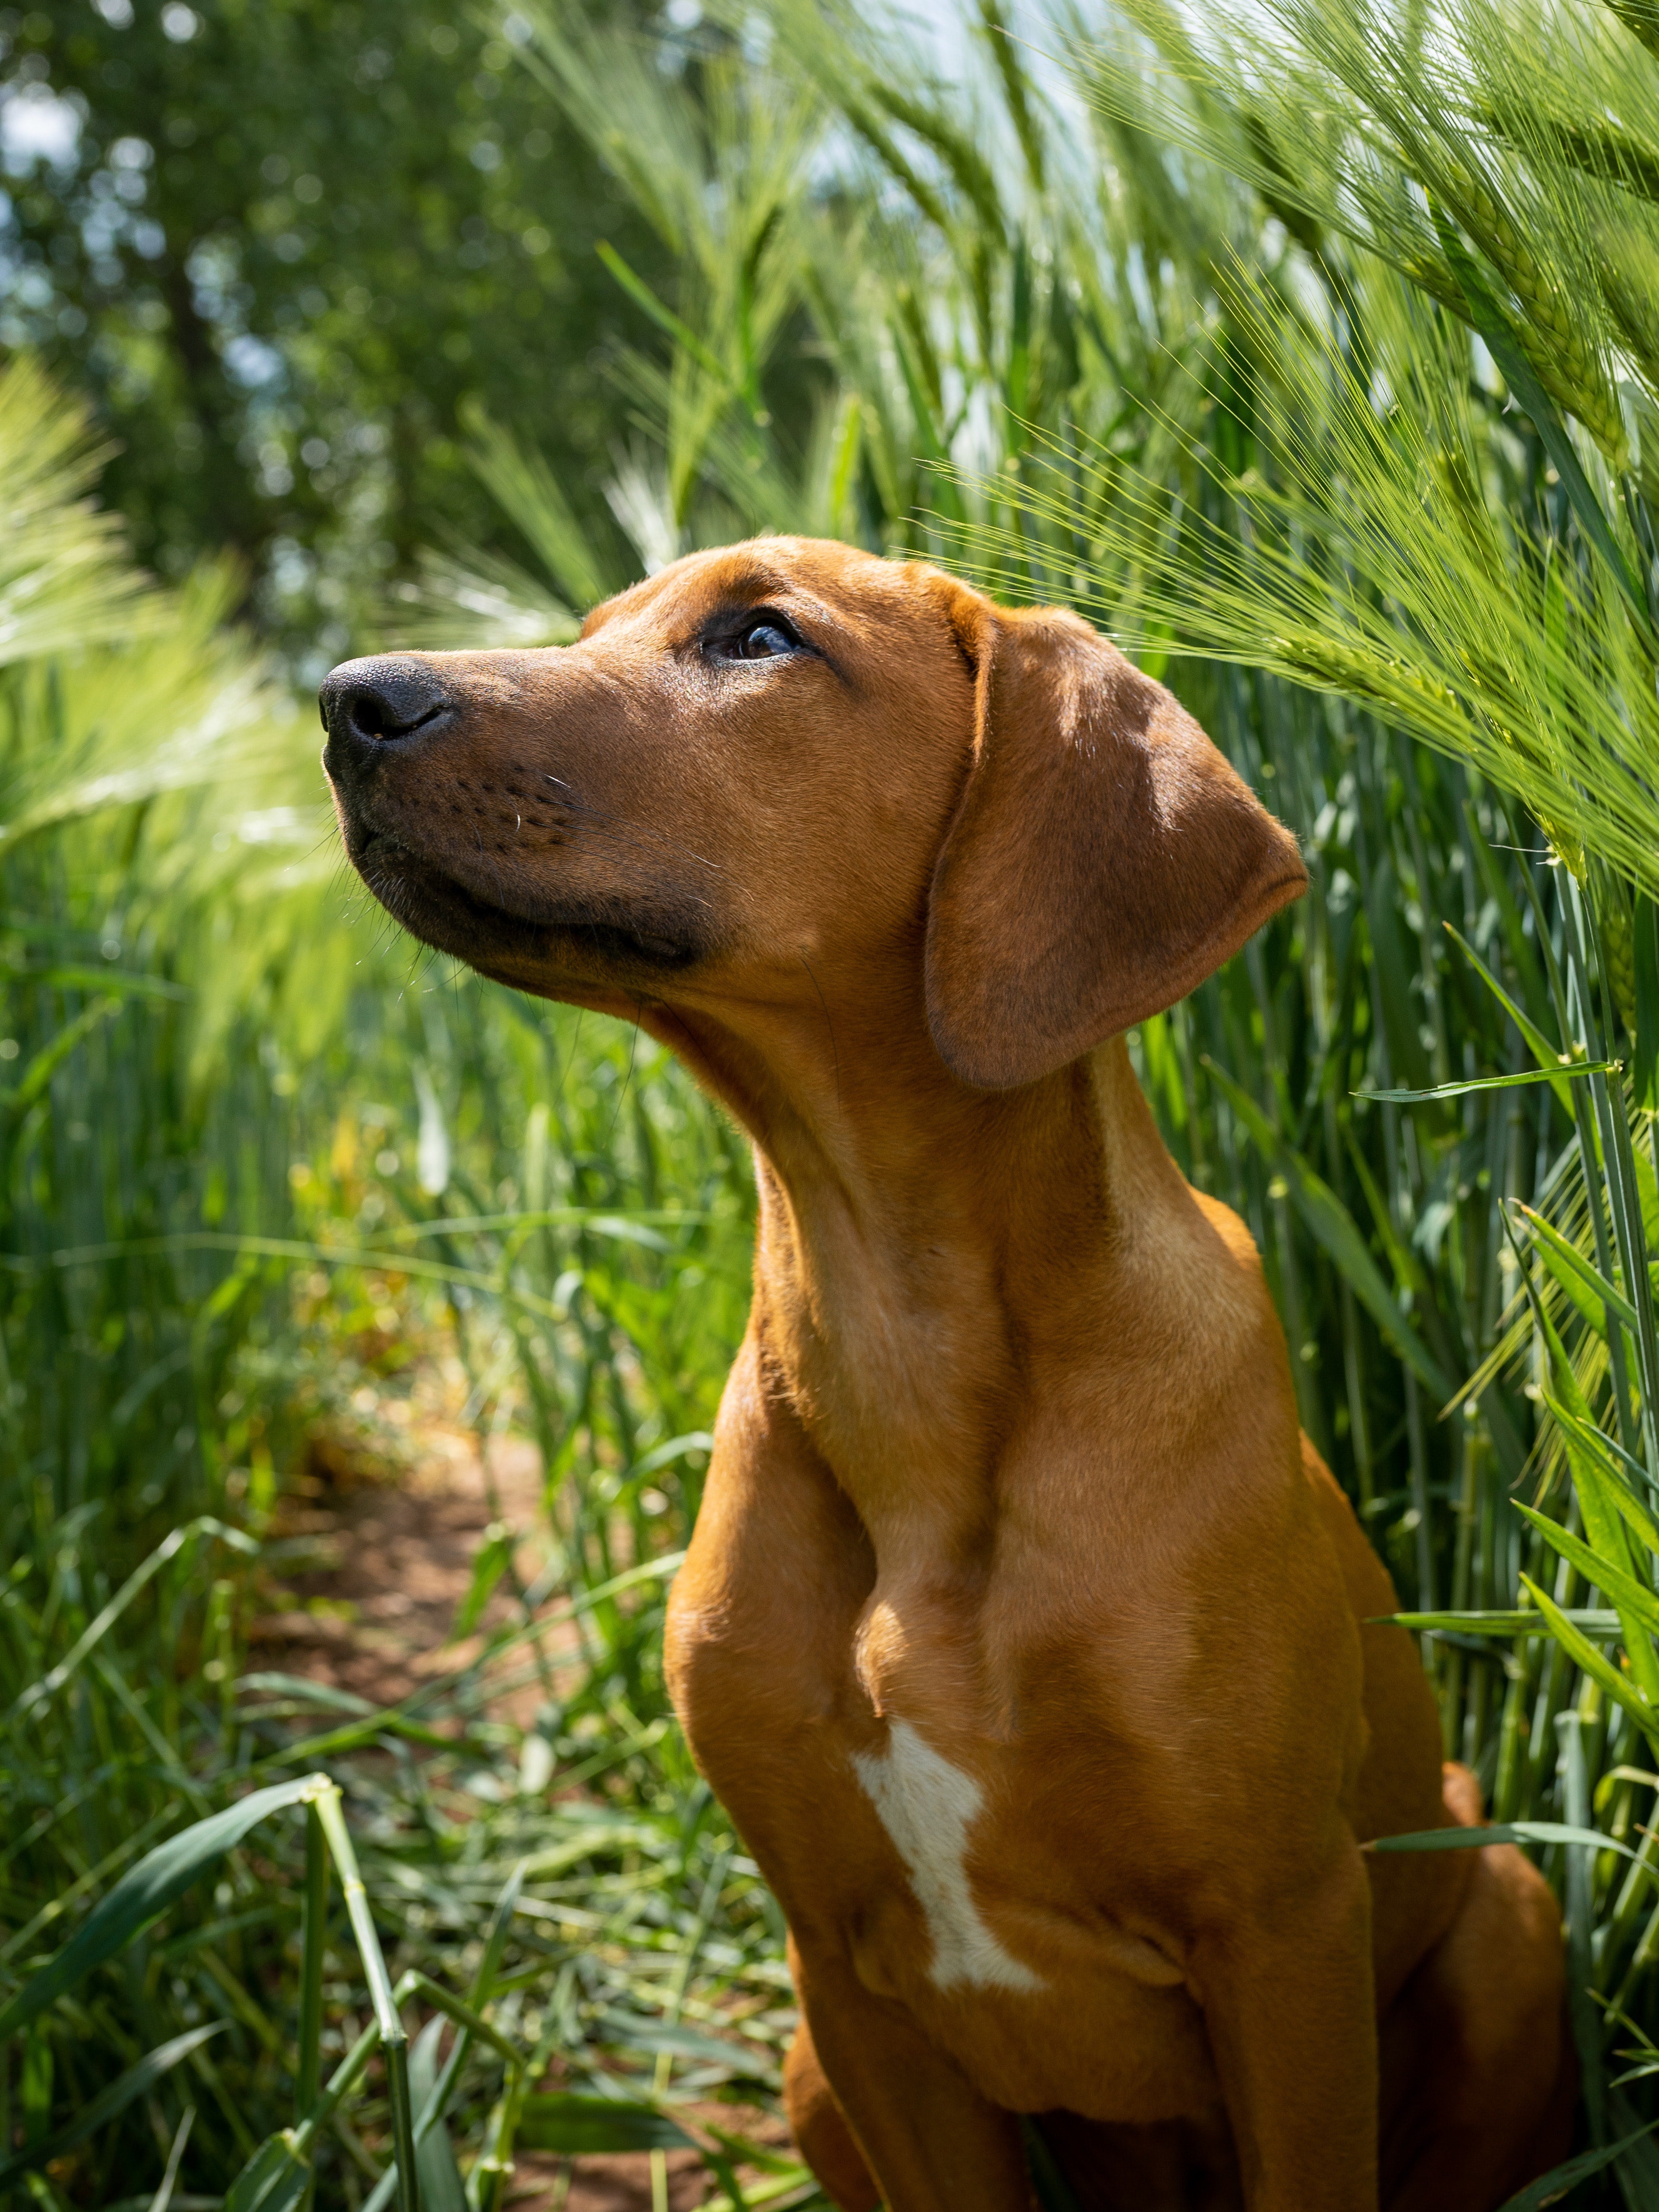 is citronella grass safe for dogs